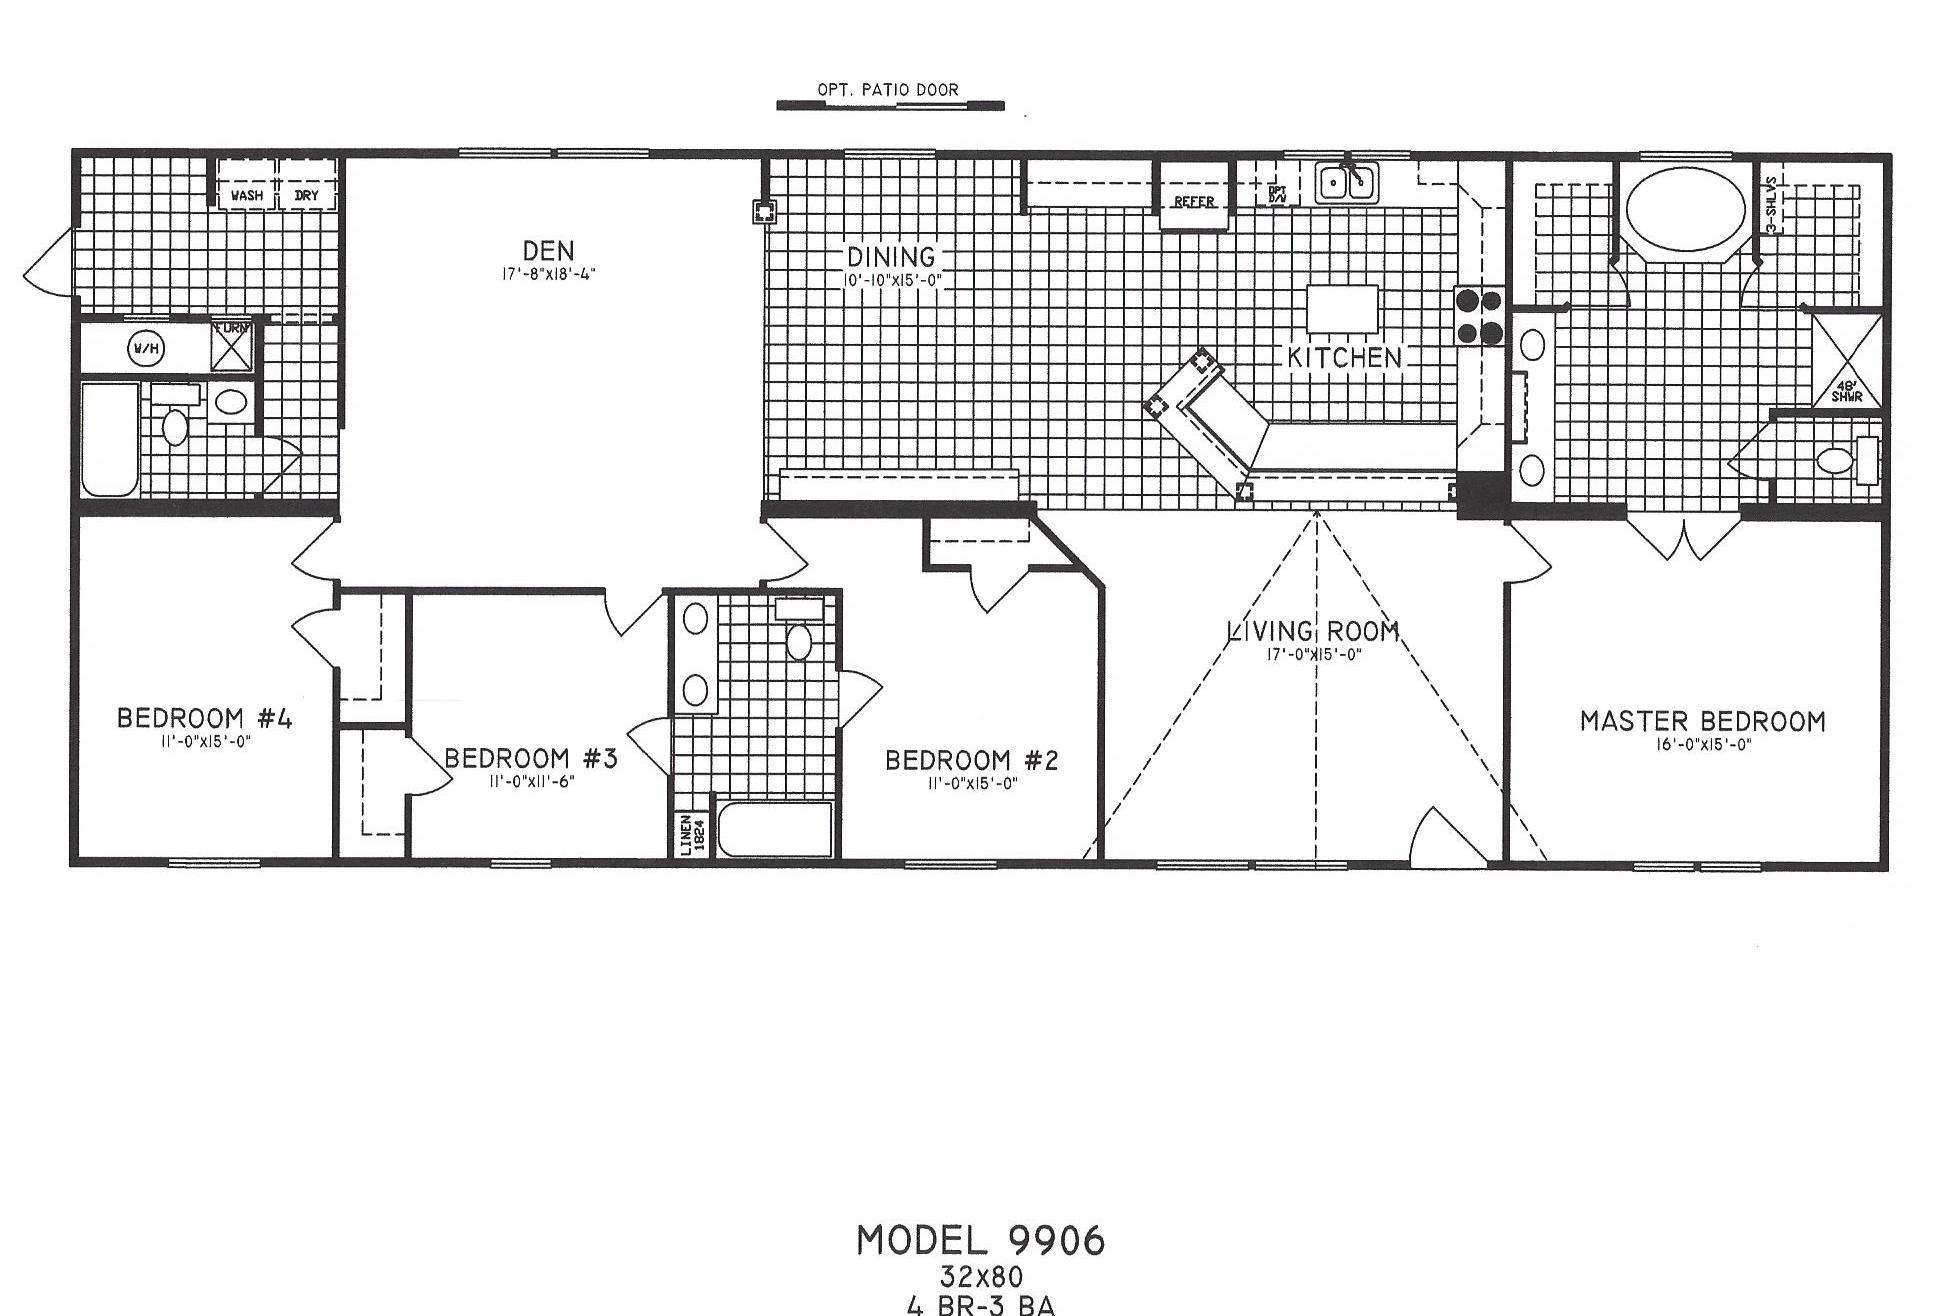 4 Bedroom Floor Plans Modular And Manufactured Homes Archives Page 2 Of 2 Hawks Homes